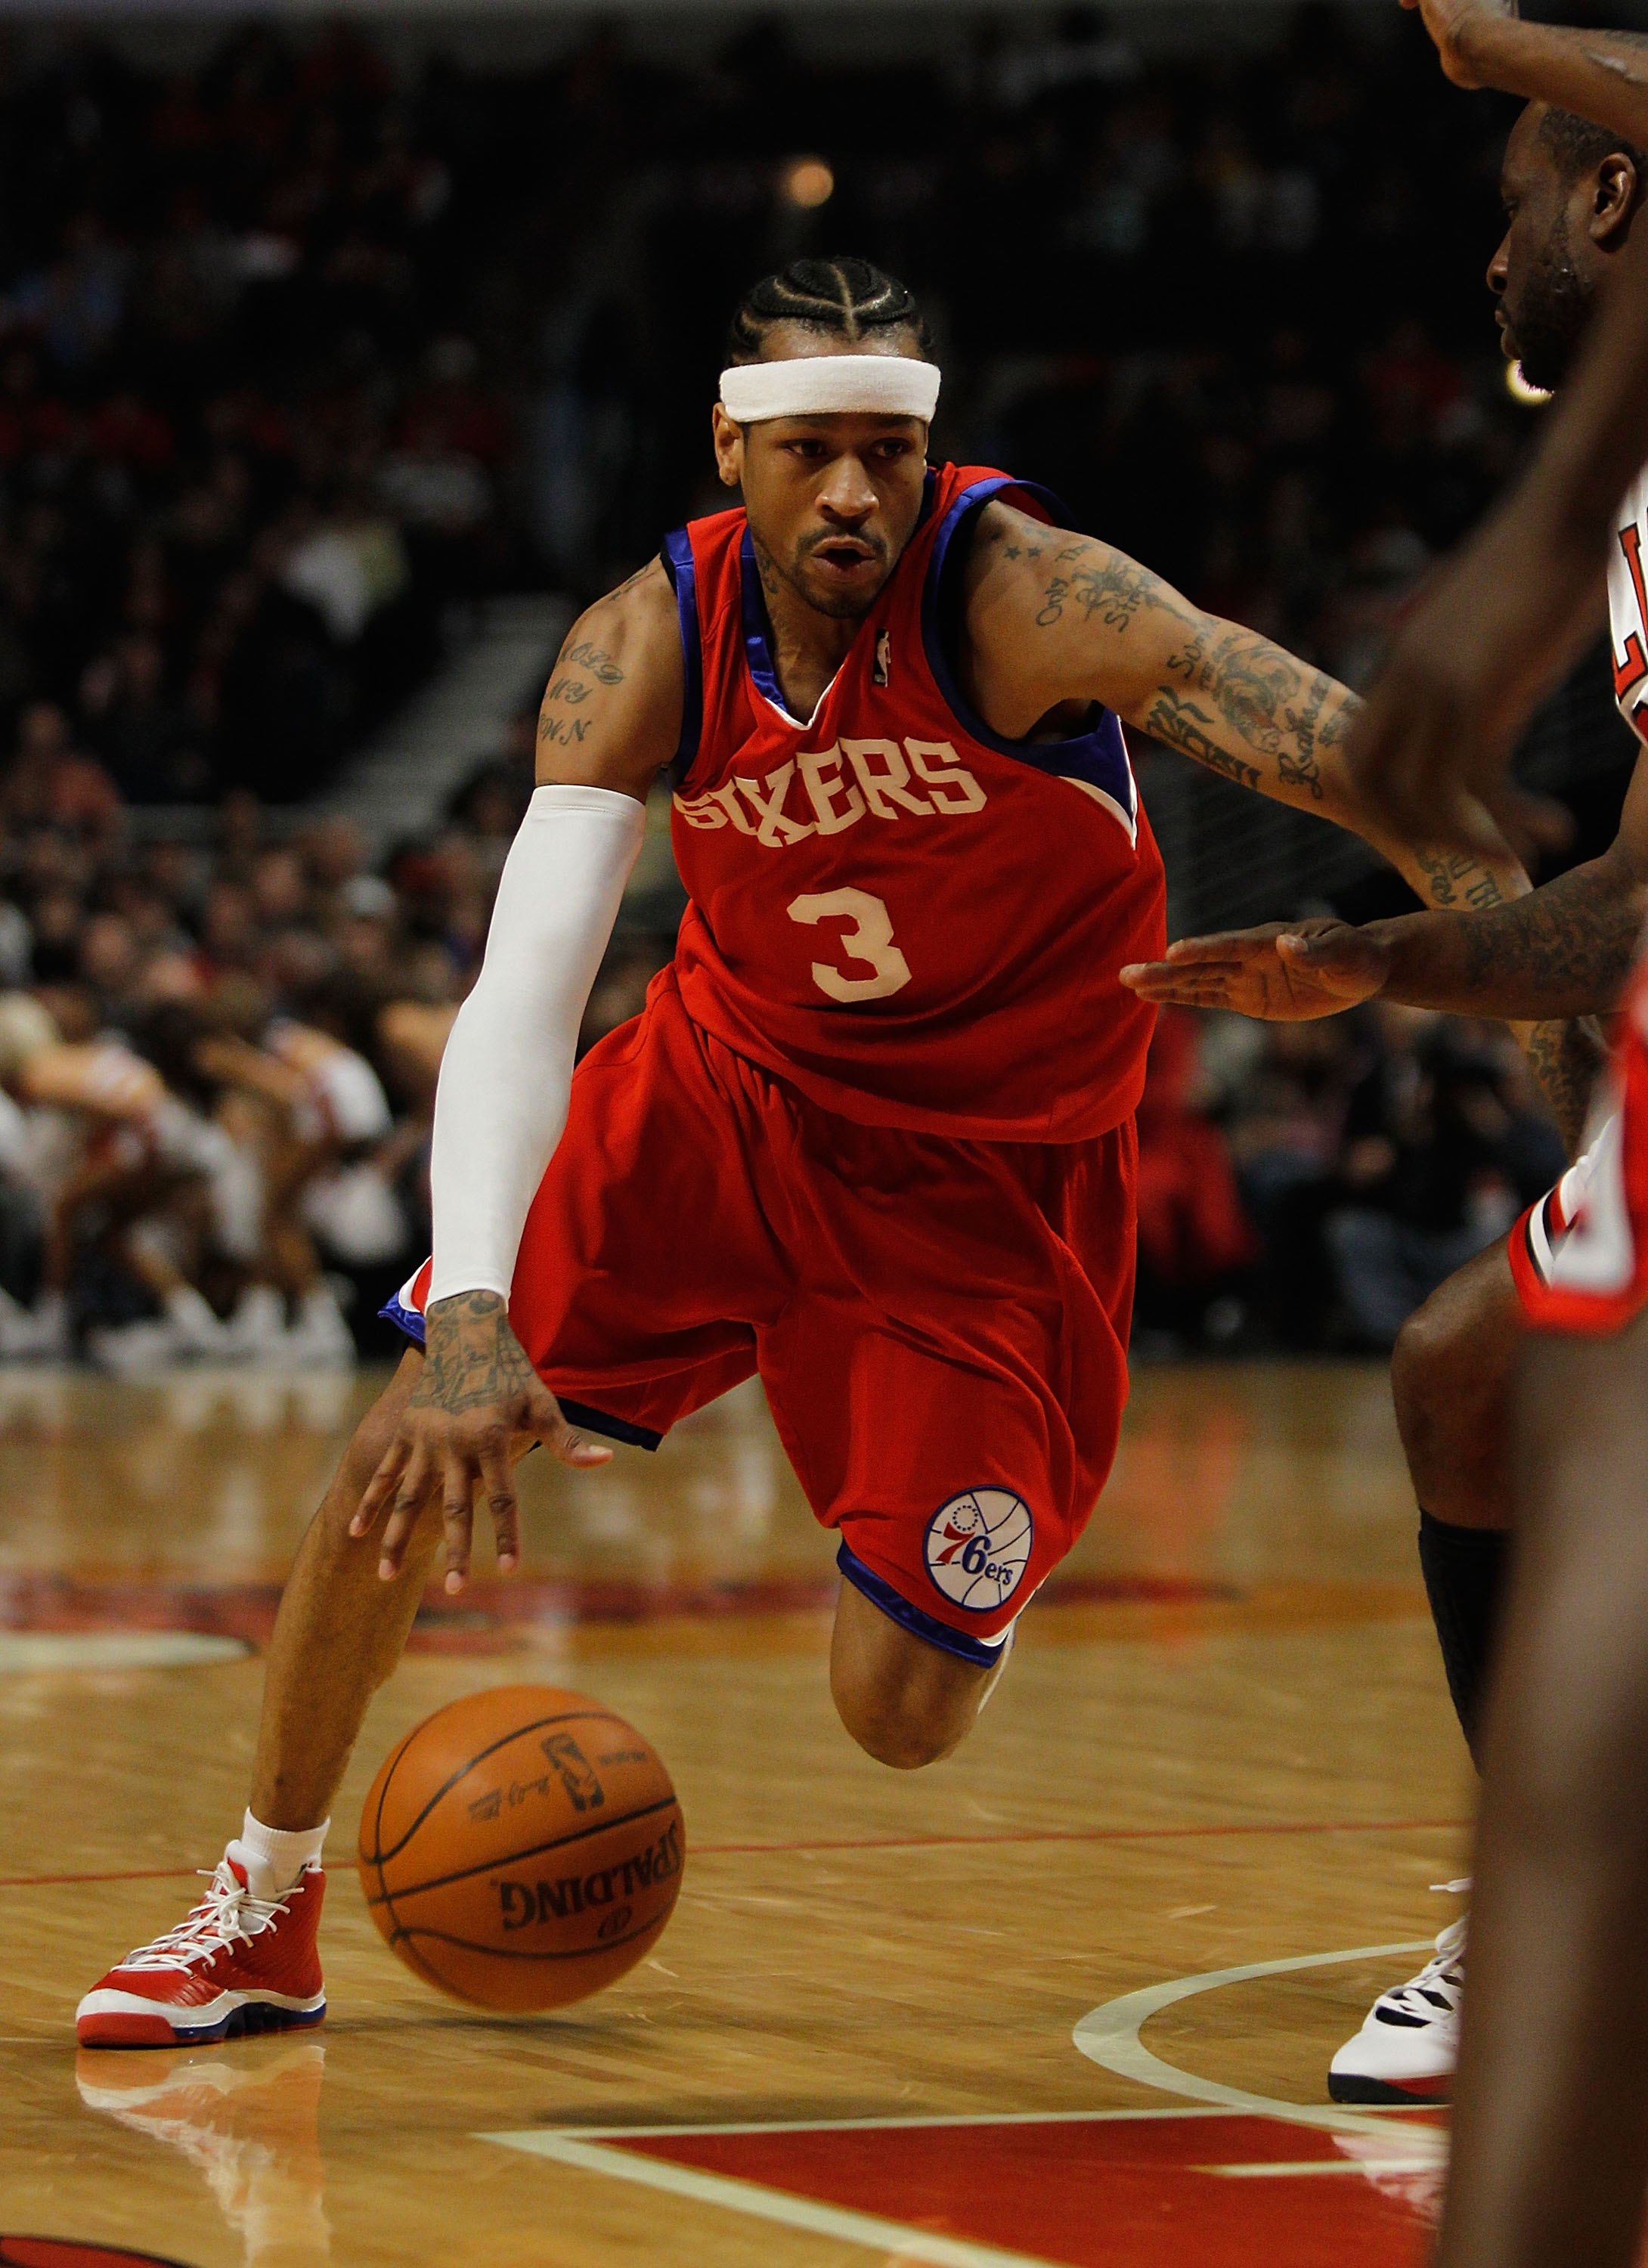 CHICAGO - FEBRUARY 20: Allen Iverson #3 of the Philadelphia 76ers moves against the Chicago Bulls at the United Center on February 20, 2010 in Chicago, Illinois. The Bulls defeated the 76ers 122-90. NOTE TO USER: User expressly acknowledges and agrees tha